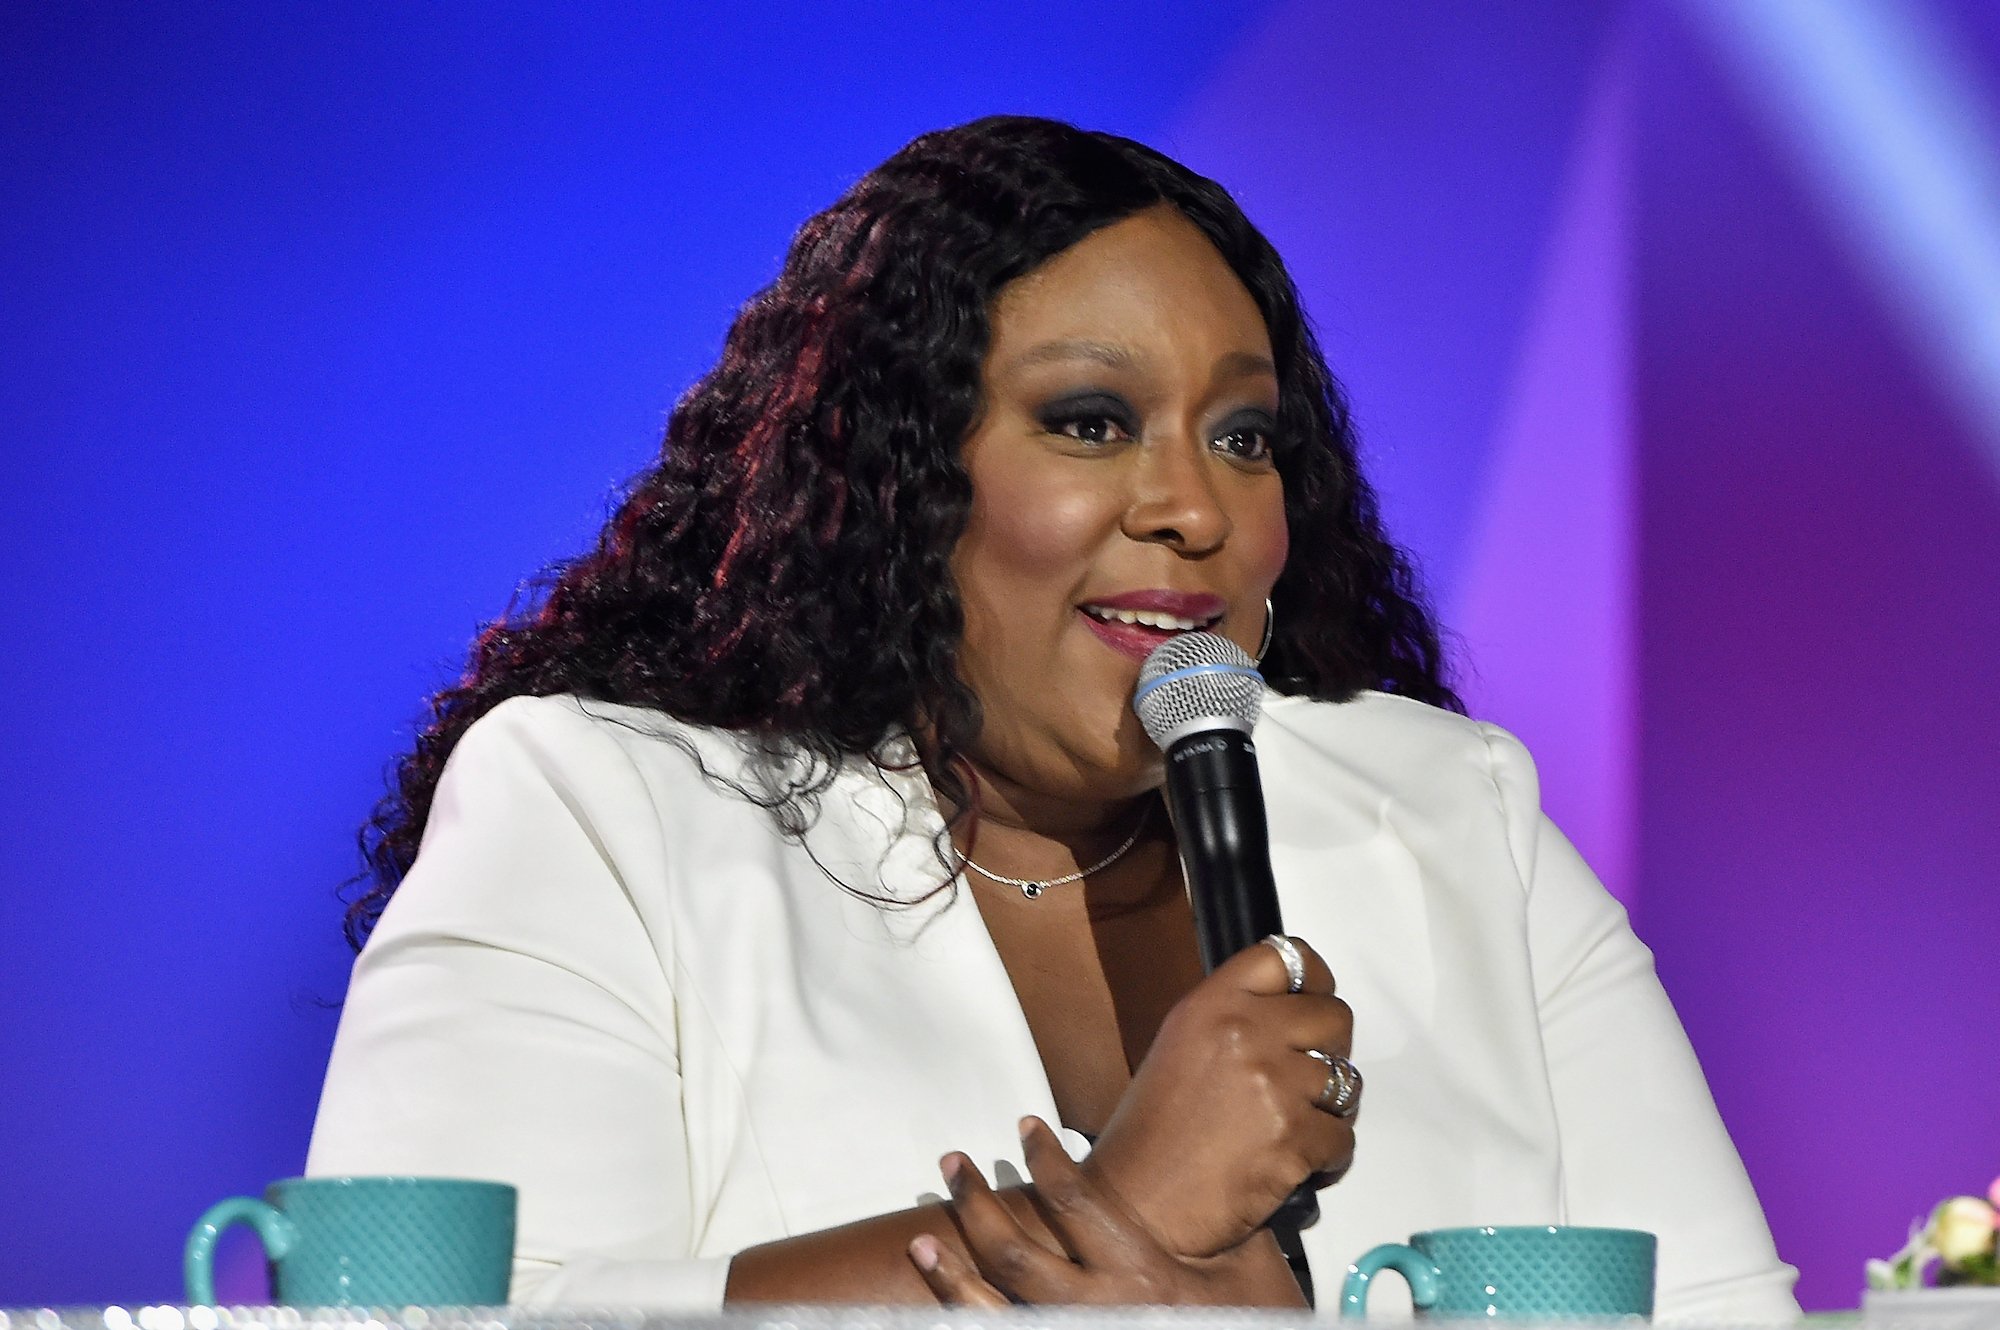 Loni Love Breaks Silence Following Rumors ‘The Real’ Was Canceled